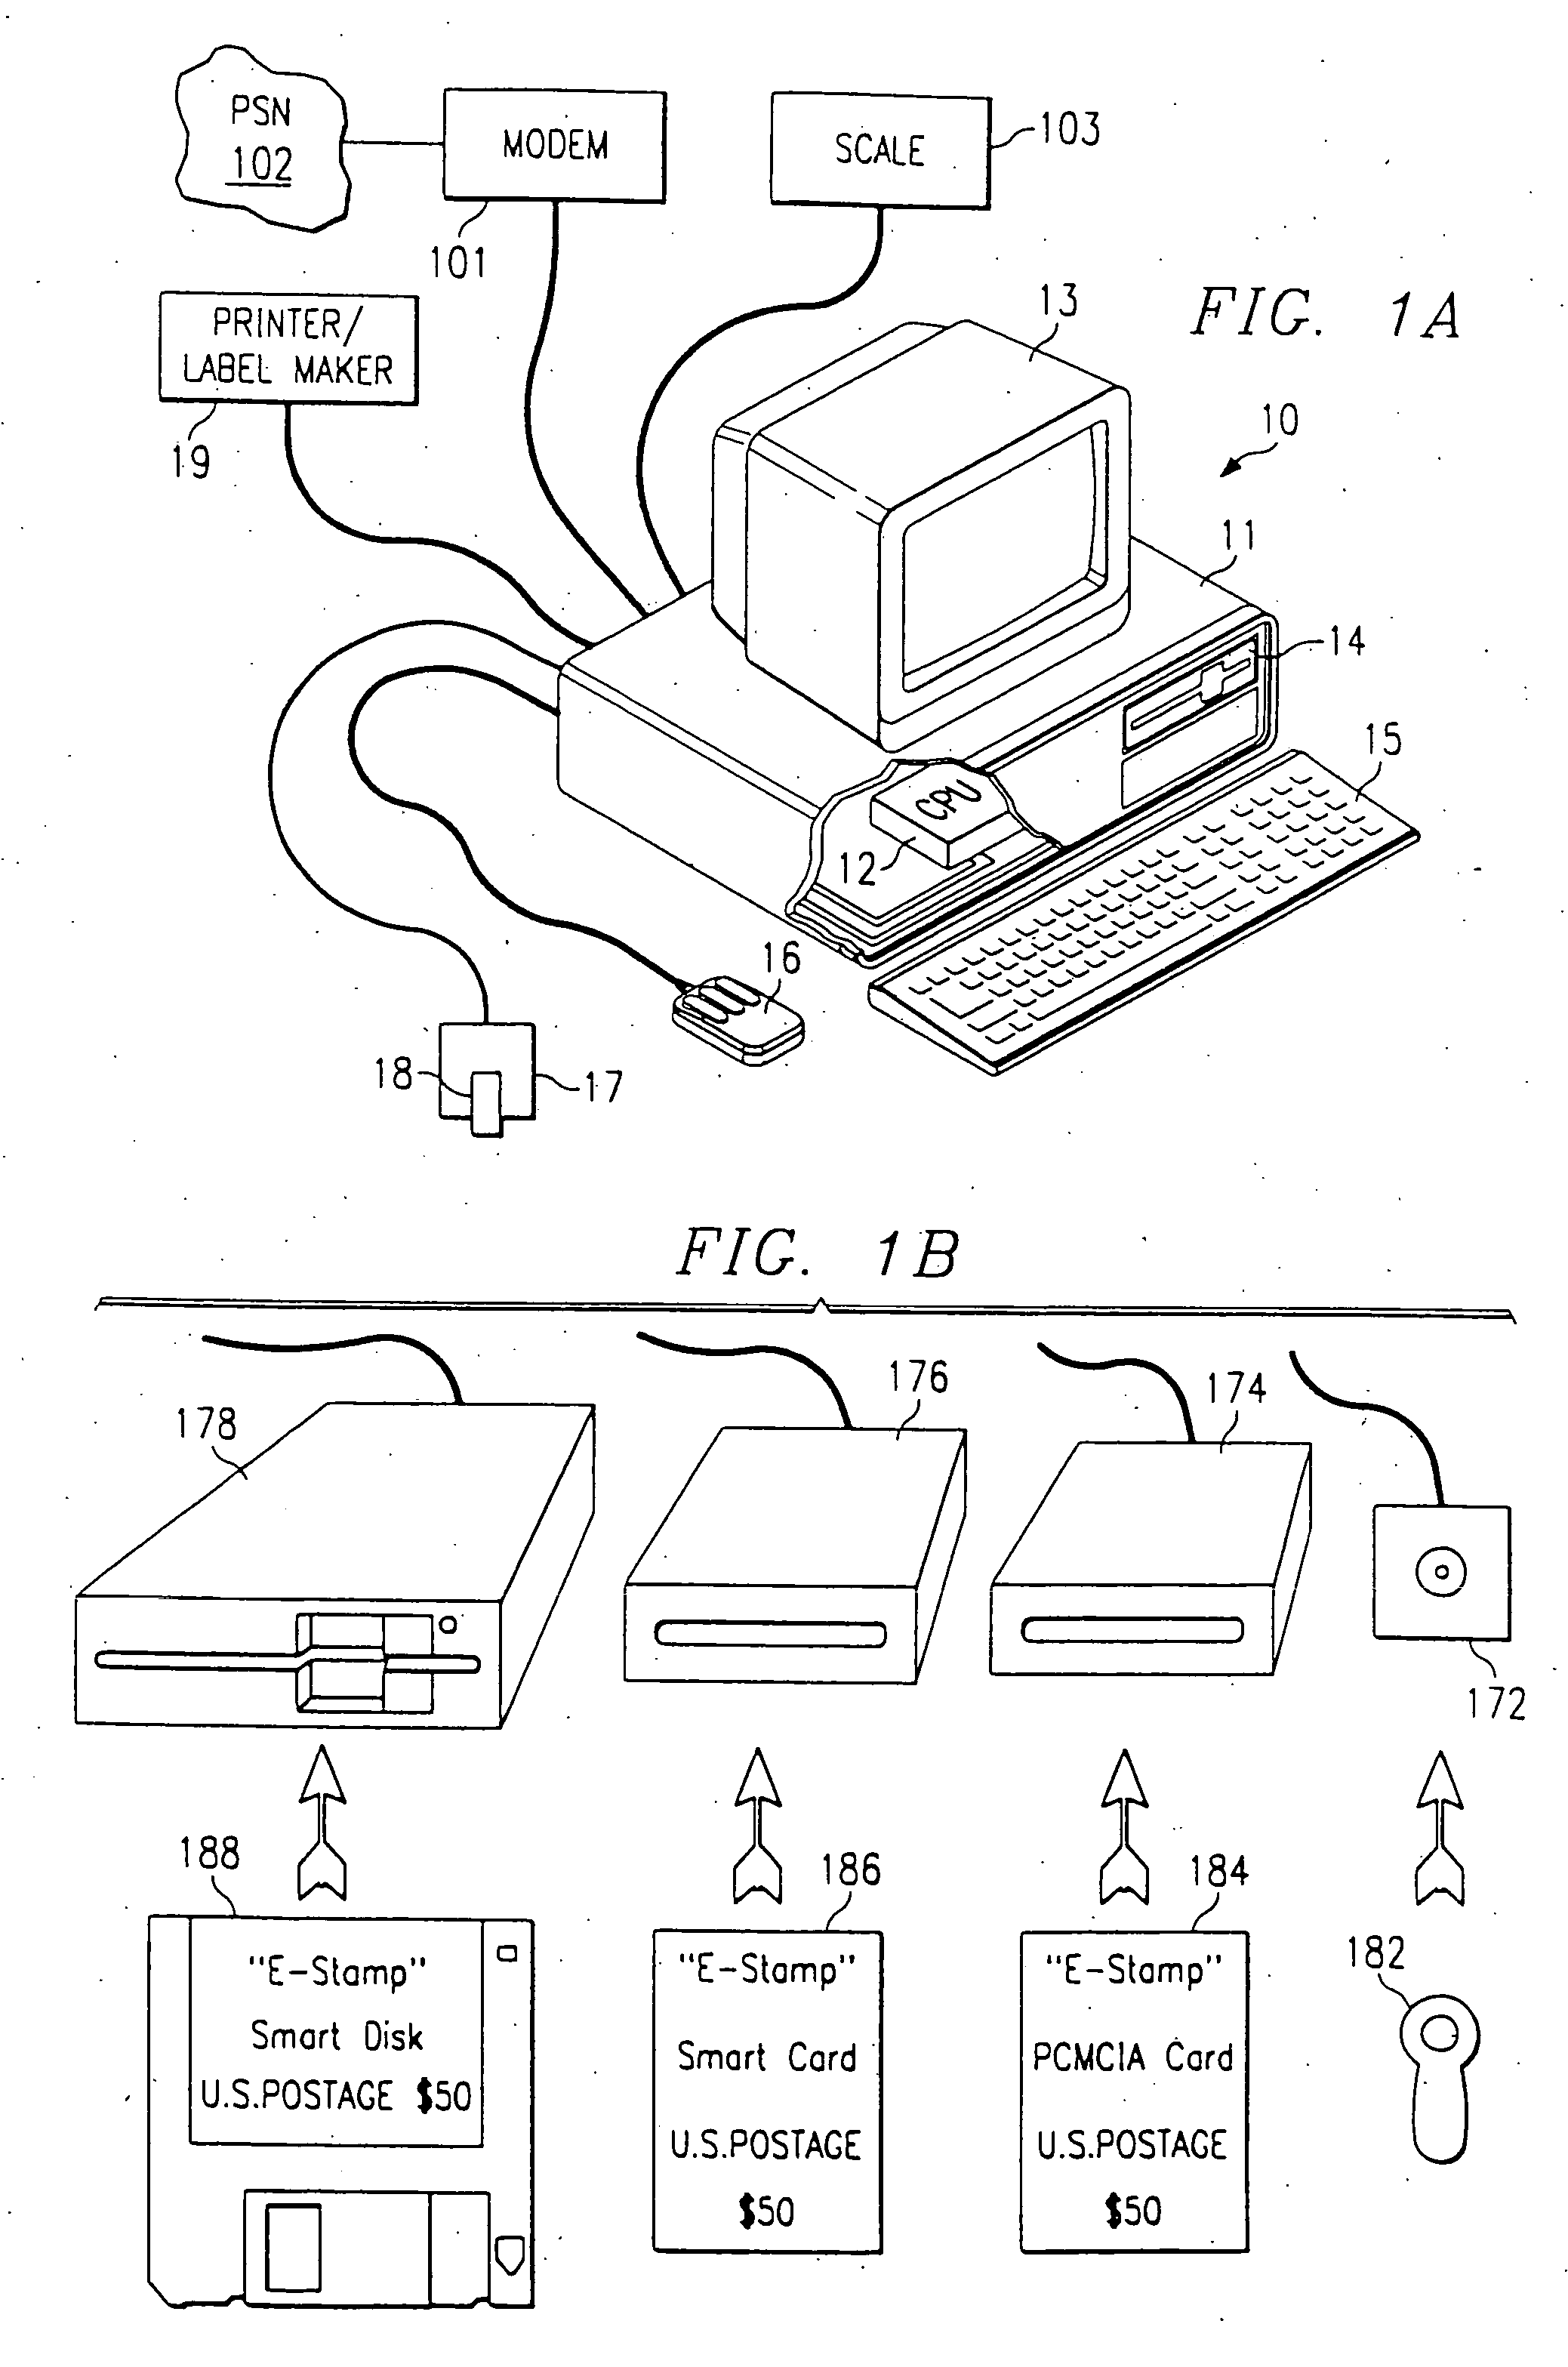 System and method for printing multiple postage indicia